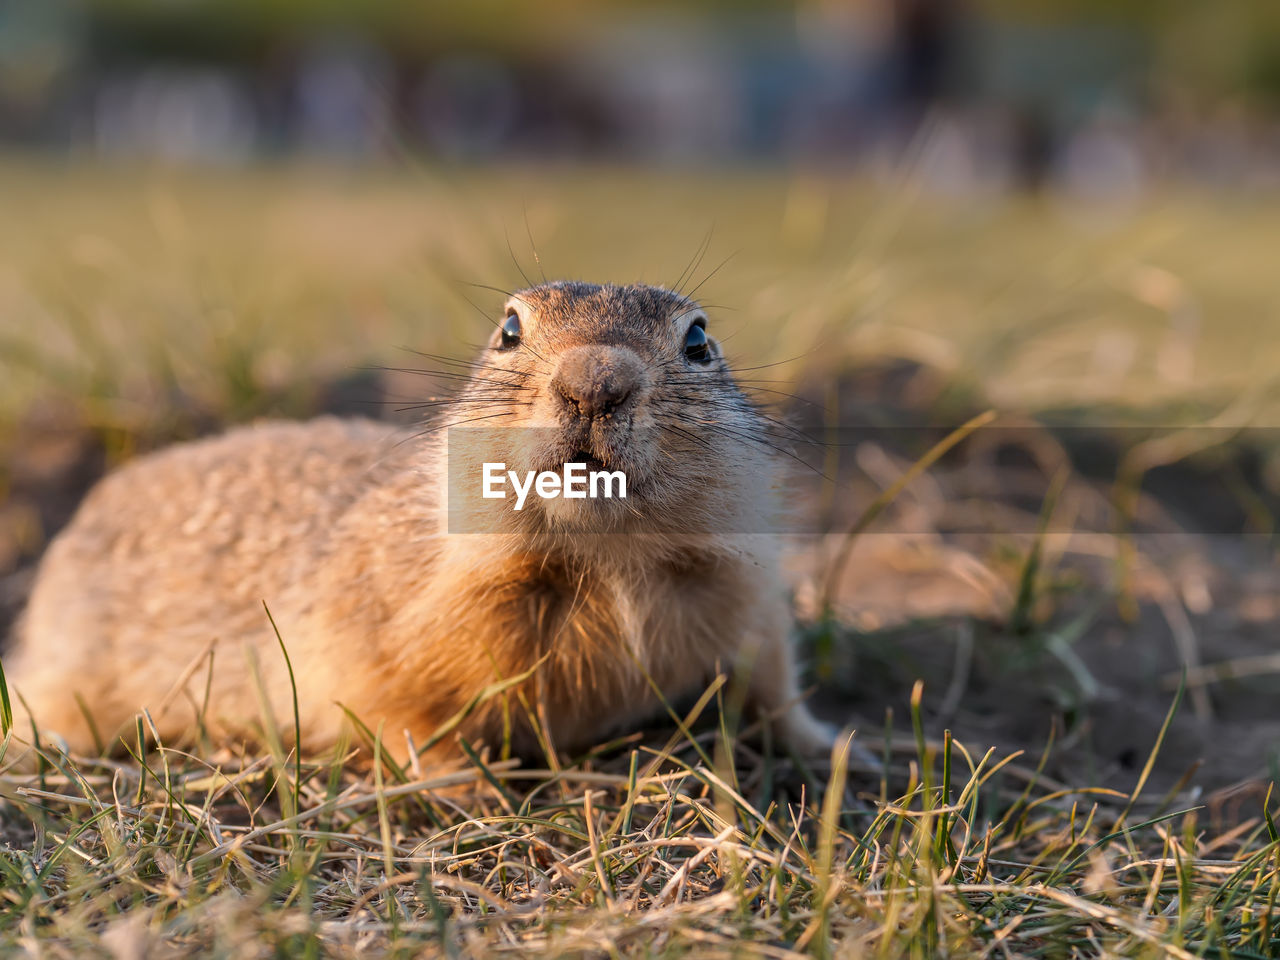 animal, animal themes, animal wildlife, mammal, one animal, wildlife, whiskers, prairie dog, nature, grass, rodent, prairie, no people, pet, portrait, squirrel, outdoors, plant, close-up, day, selective focus, looking at camera, cute, eating